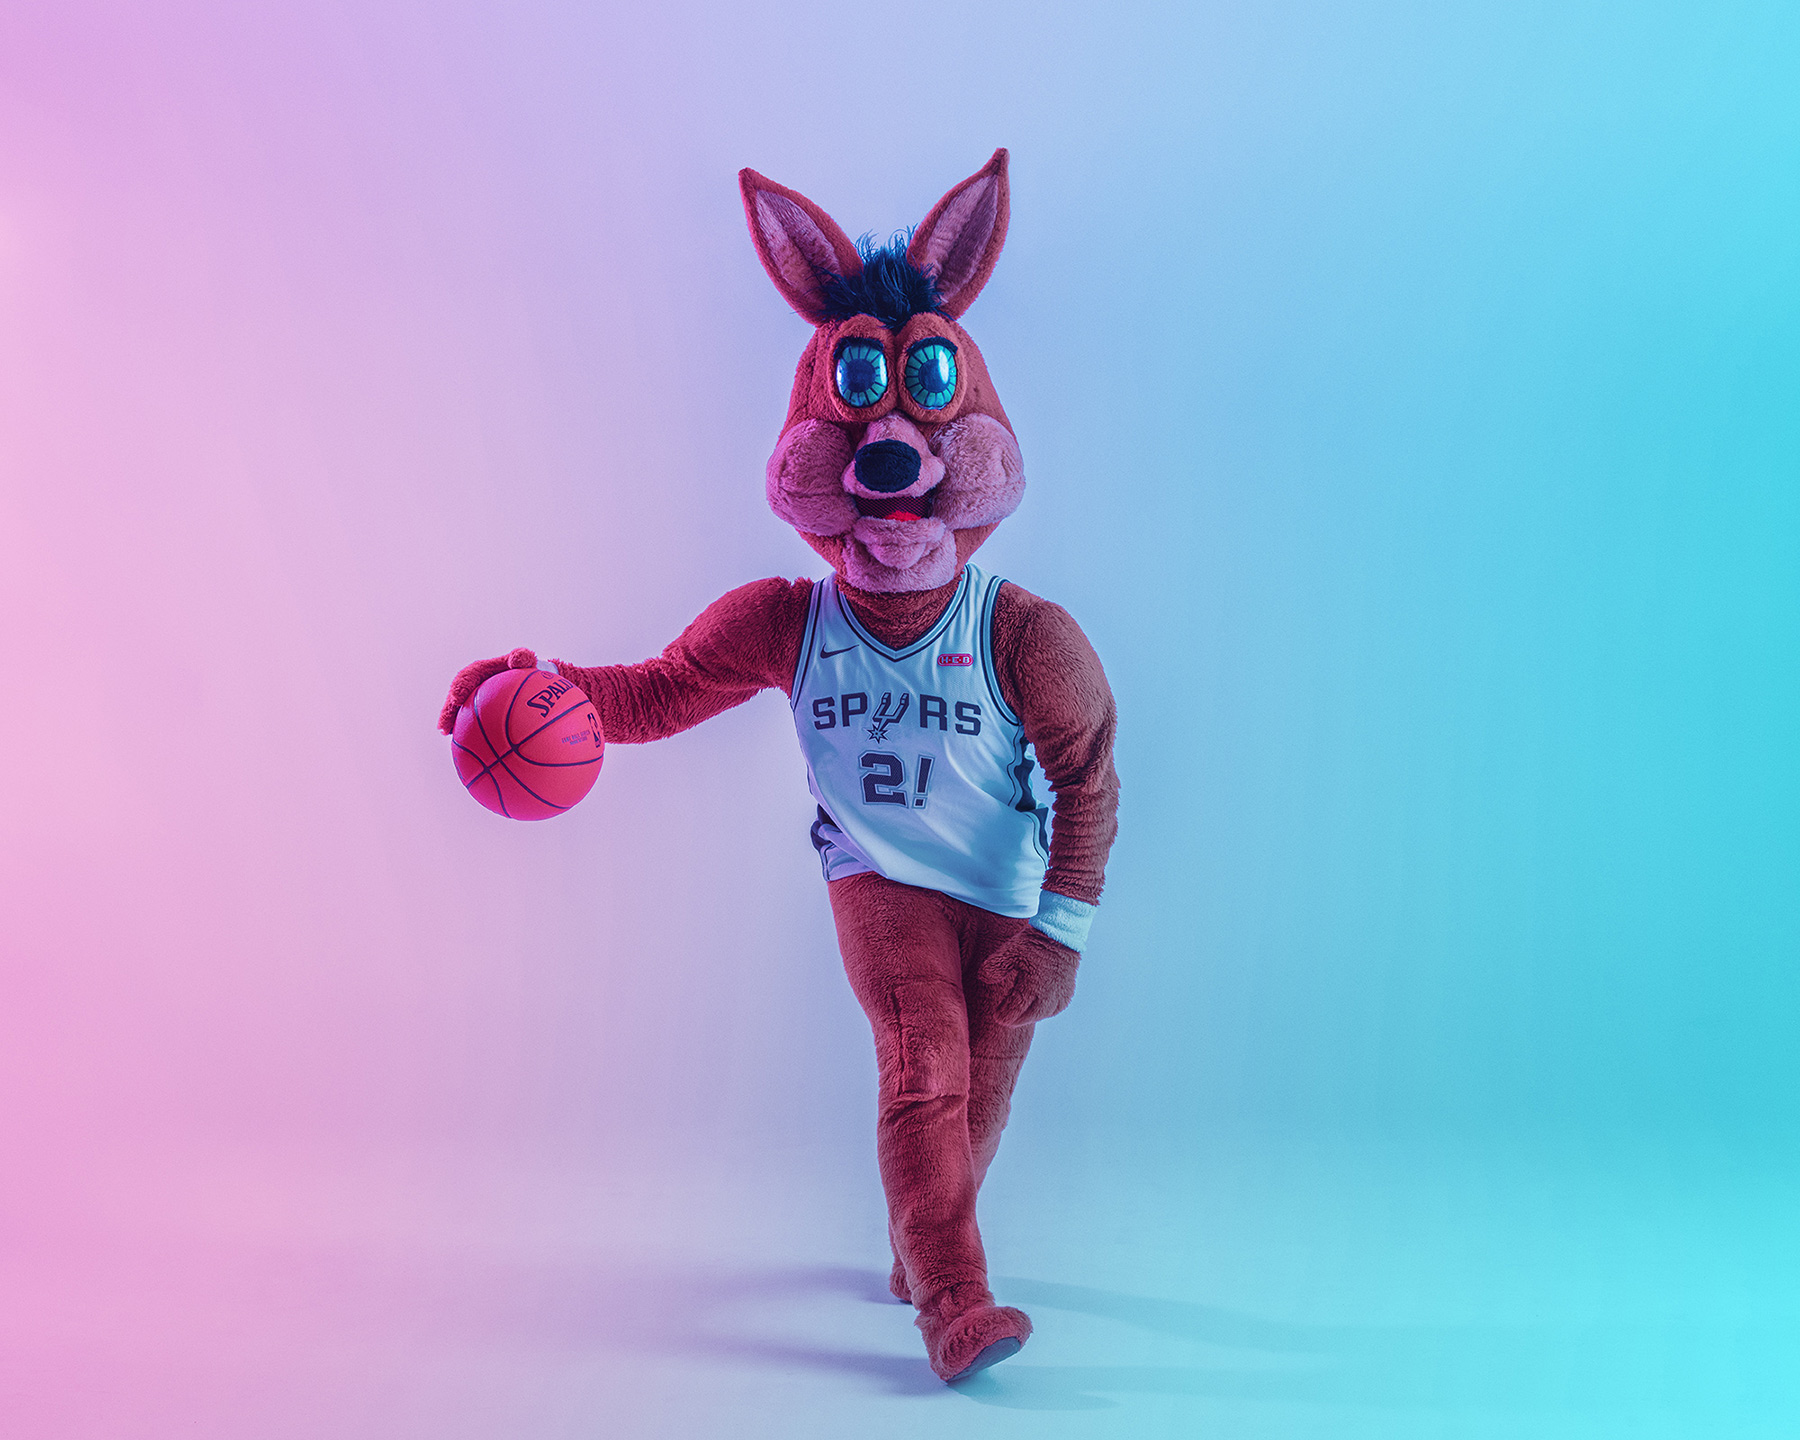 Spurs mascot, The coyote, photographed by photographer Josh Huskin in San Antonio, TX